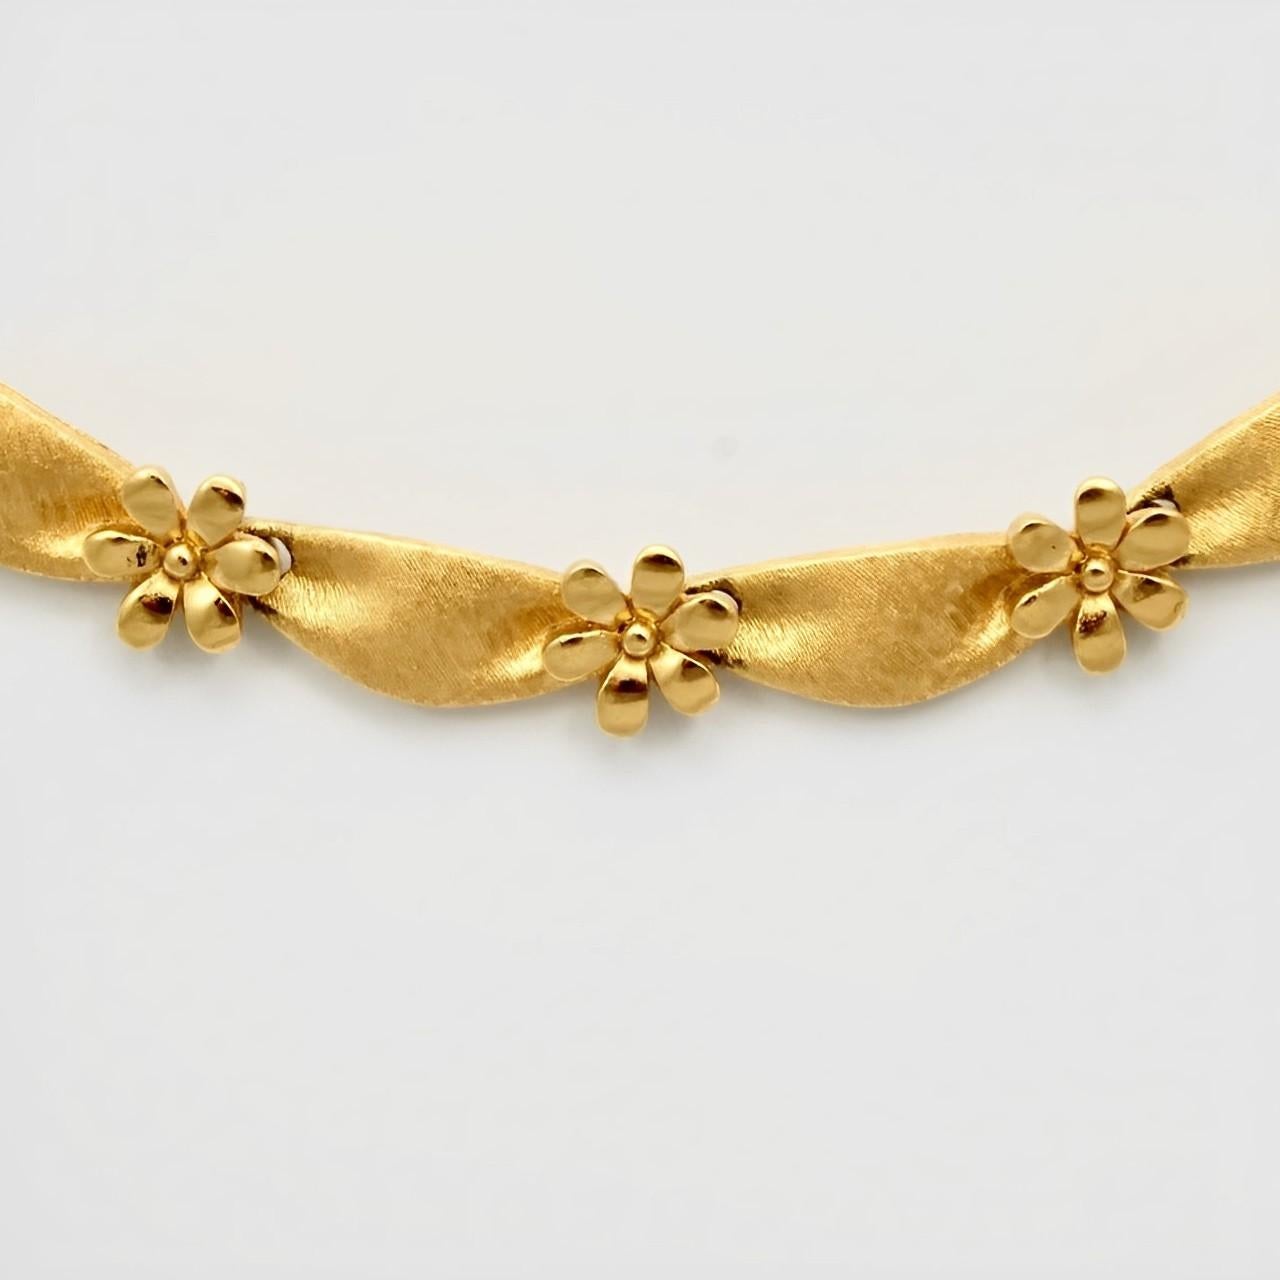 Beautiful Trifari brushed gold plated ribbon design necklace with contrasting shiny flowers. Length 40 cm / 15.75 inches, including the extension, and the flowers are width 9mm / .35 inches. The necklace is in very good condition.

This lovely